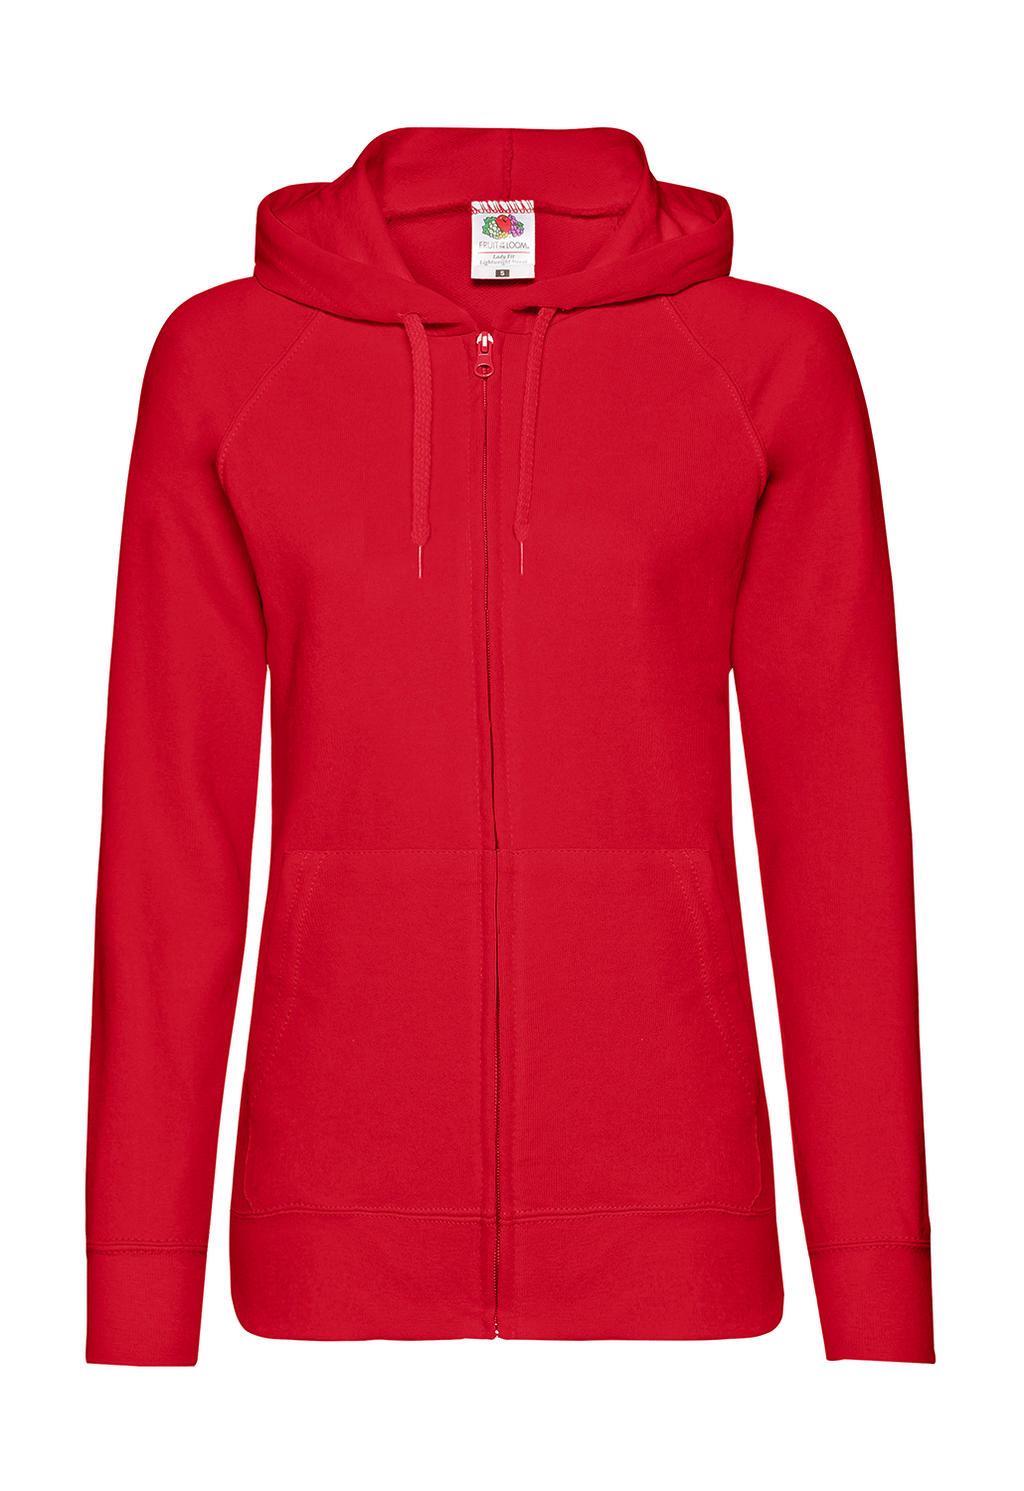  Ladies Lightweight Hooded Sweat Jacket in Farbe Red